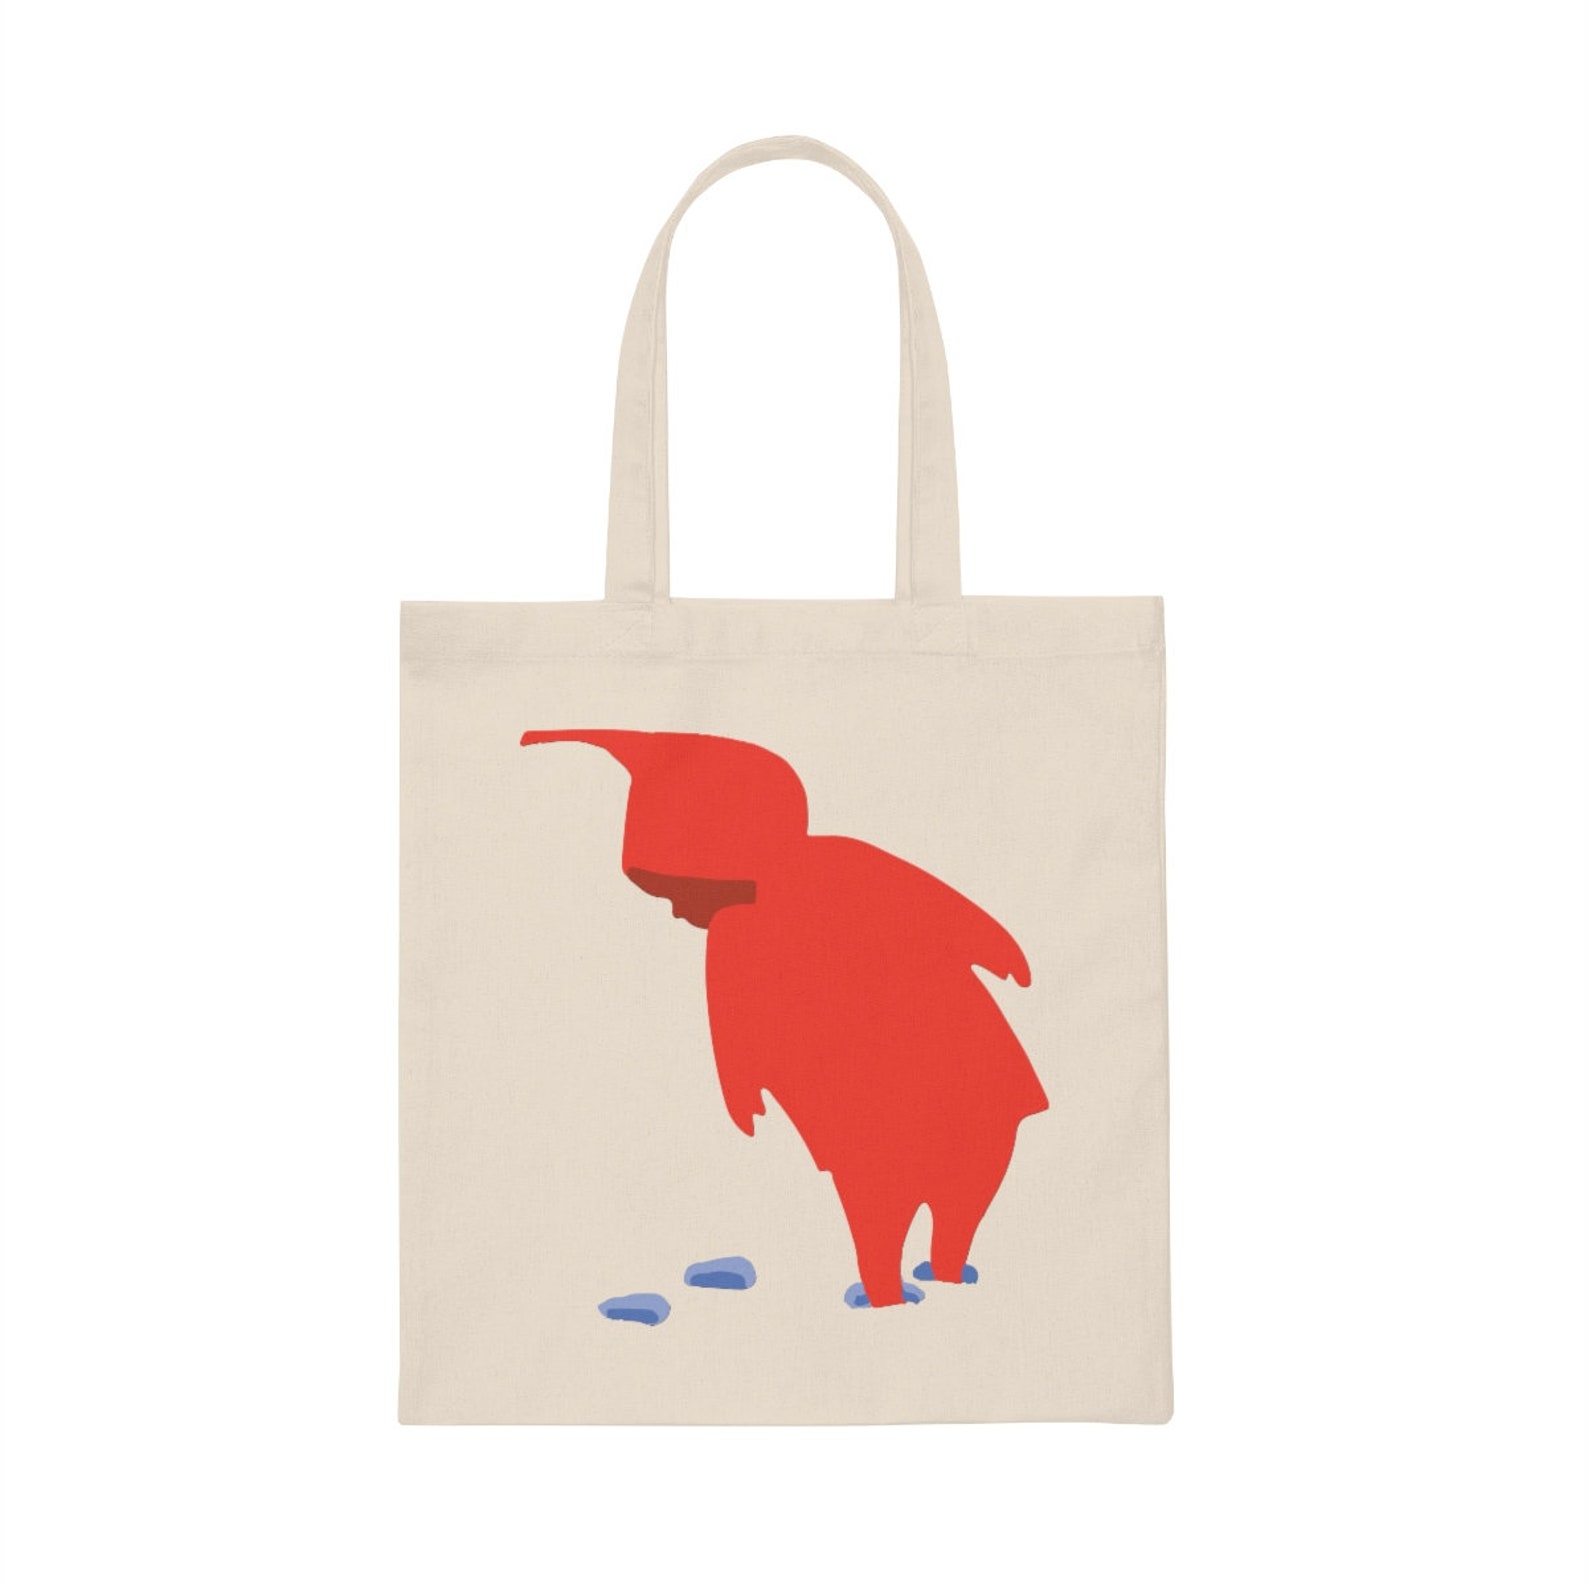 Snowy Day Canvas Tote Bag